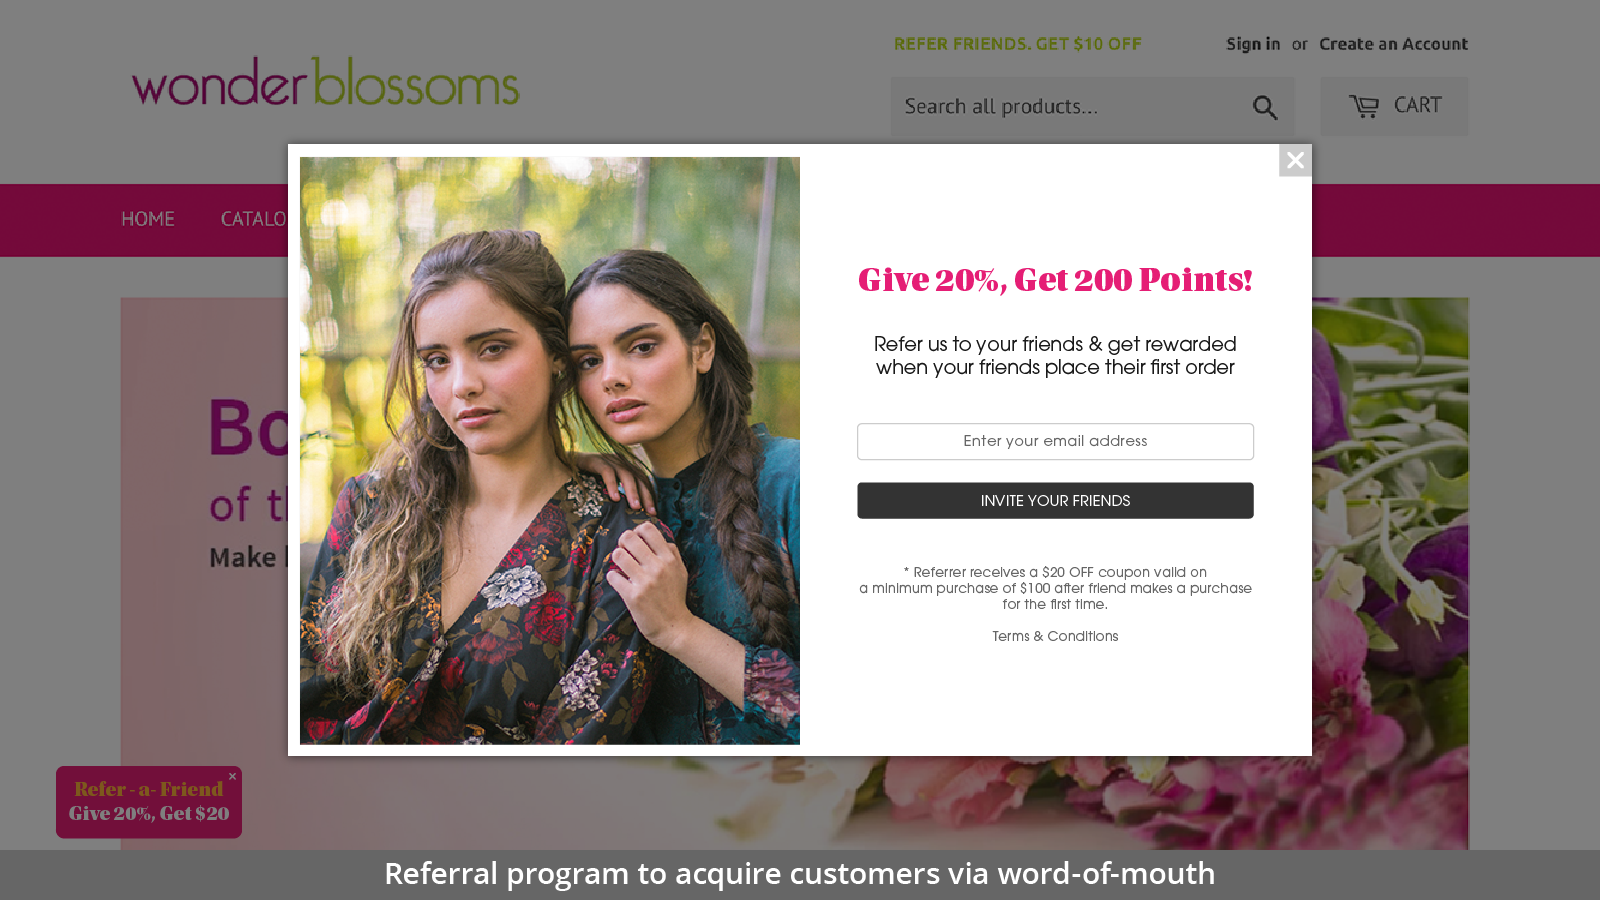 REFERRAL PROGRAM TO ACQUIRE CUSTOMERS VIA WORD-OF-MOUTH